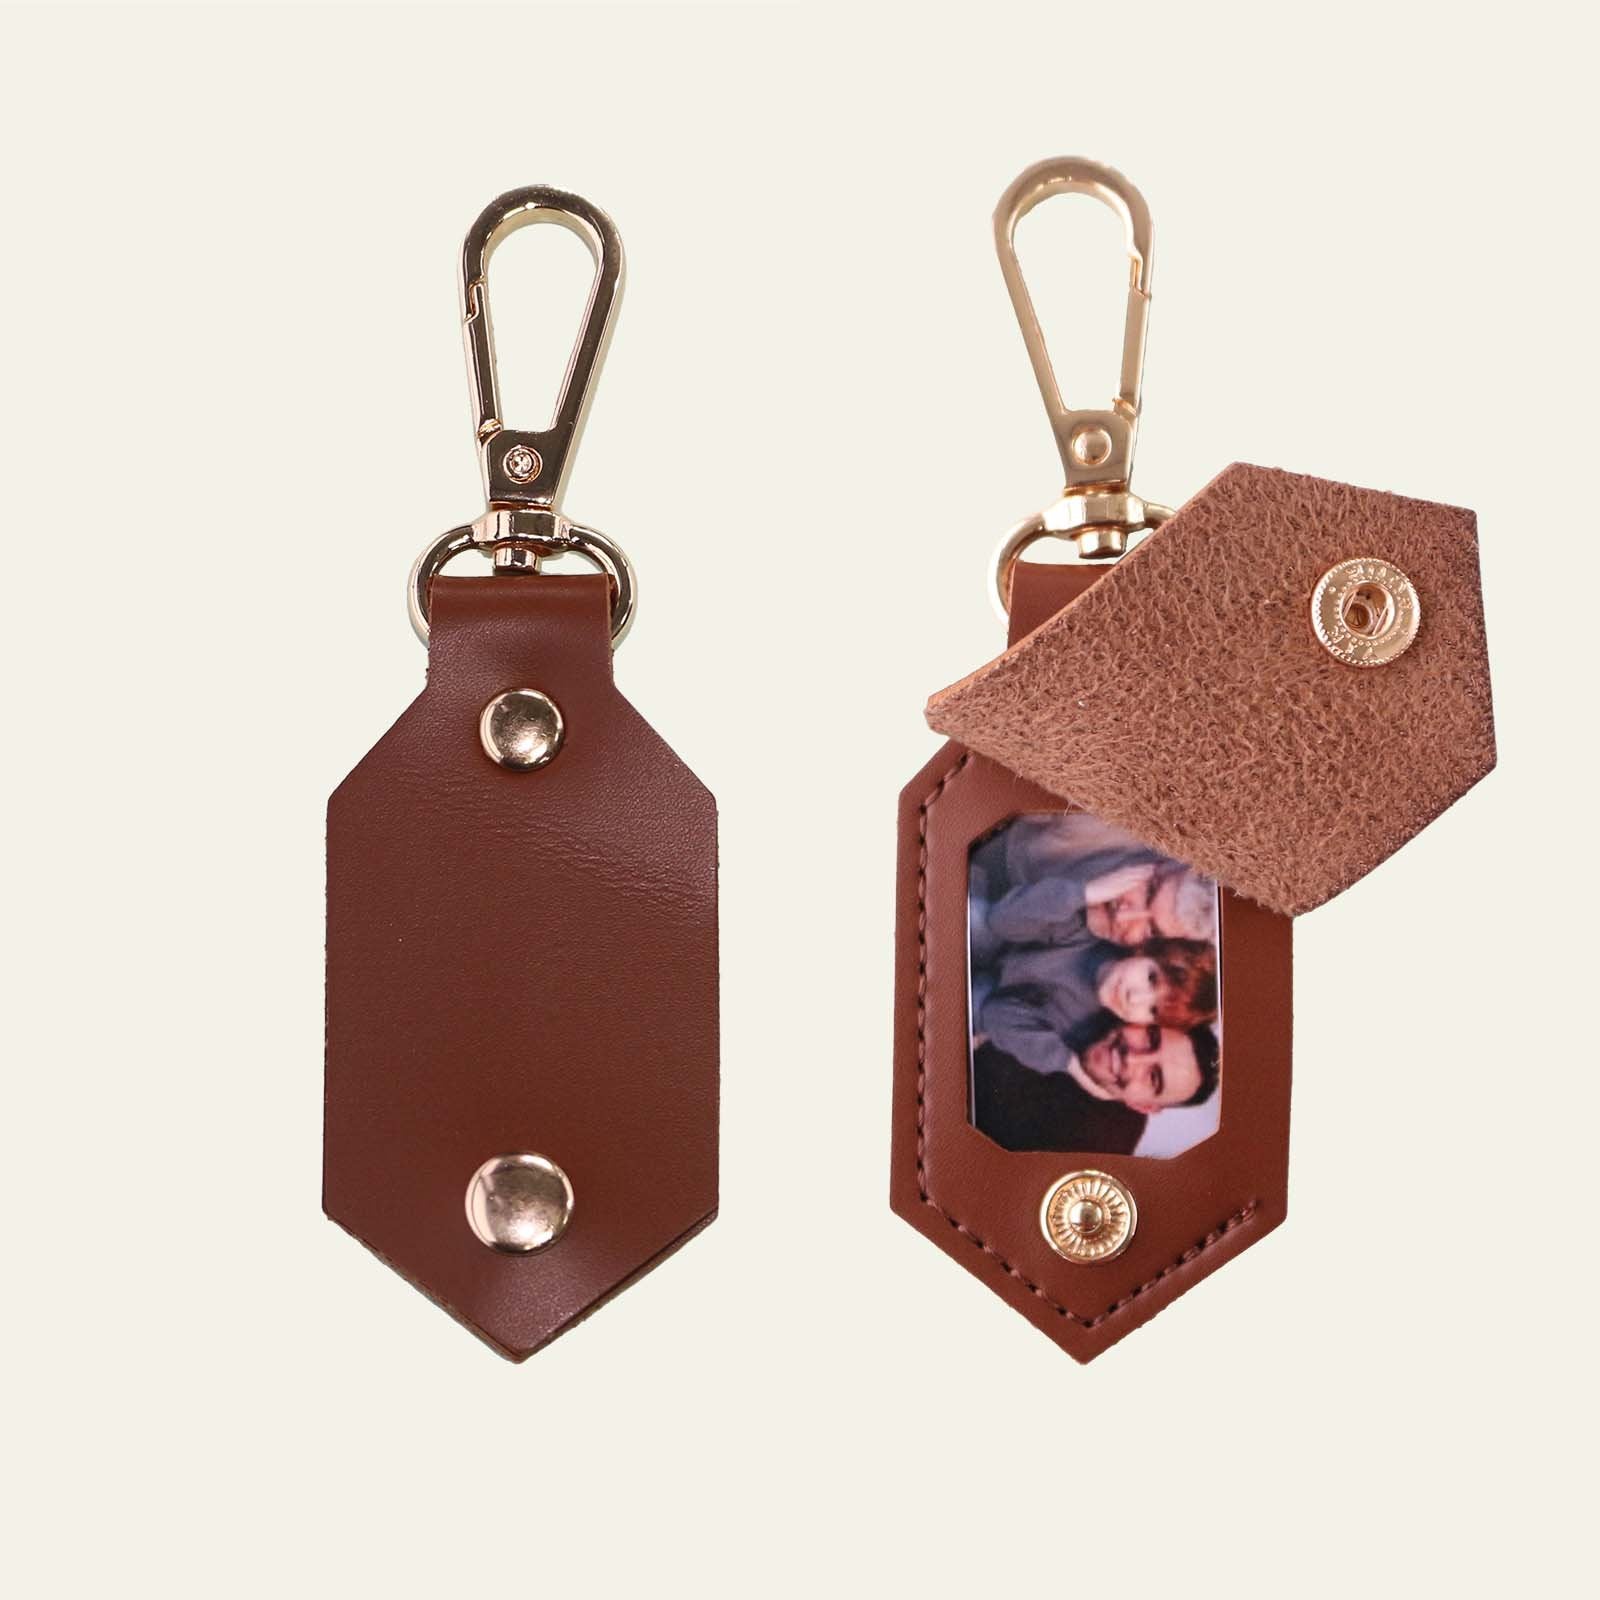 DIY Picture Key Chains, Funny Leather Photo Keychains, Custom Keychain With Picture, Llaveros Personalizados Customized Keychain Gifts For Women Boyfriend Husband Mens - uniqicon